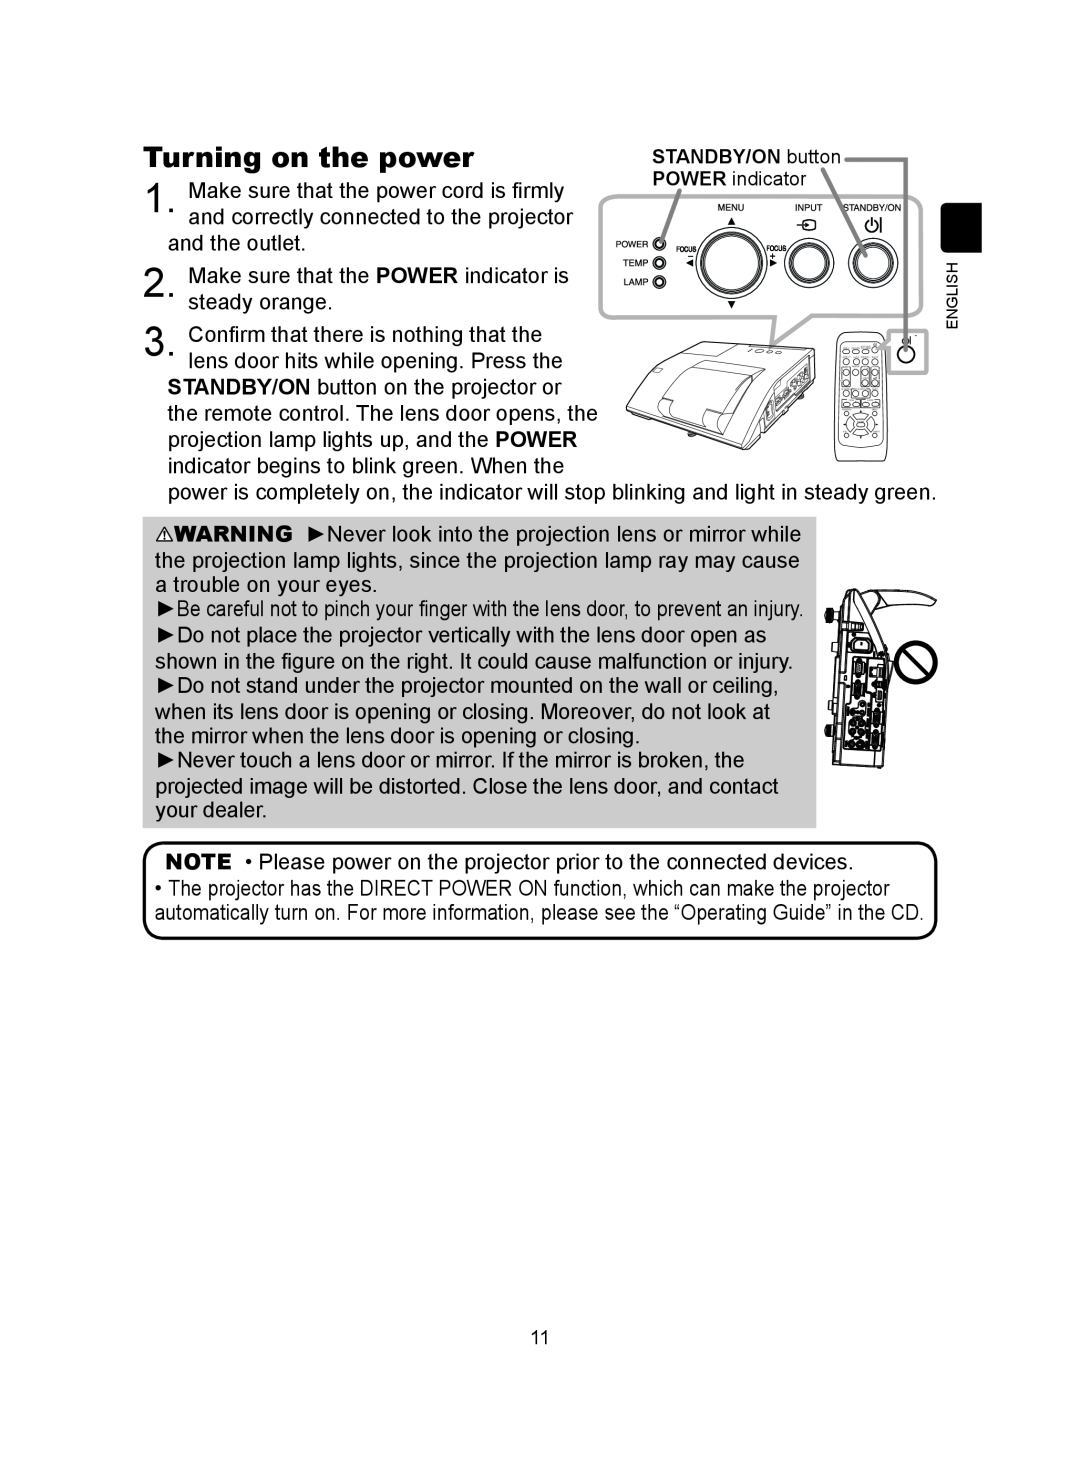 Hitachi CP-A300N user manual Turning on the power 